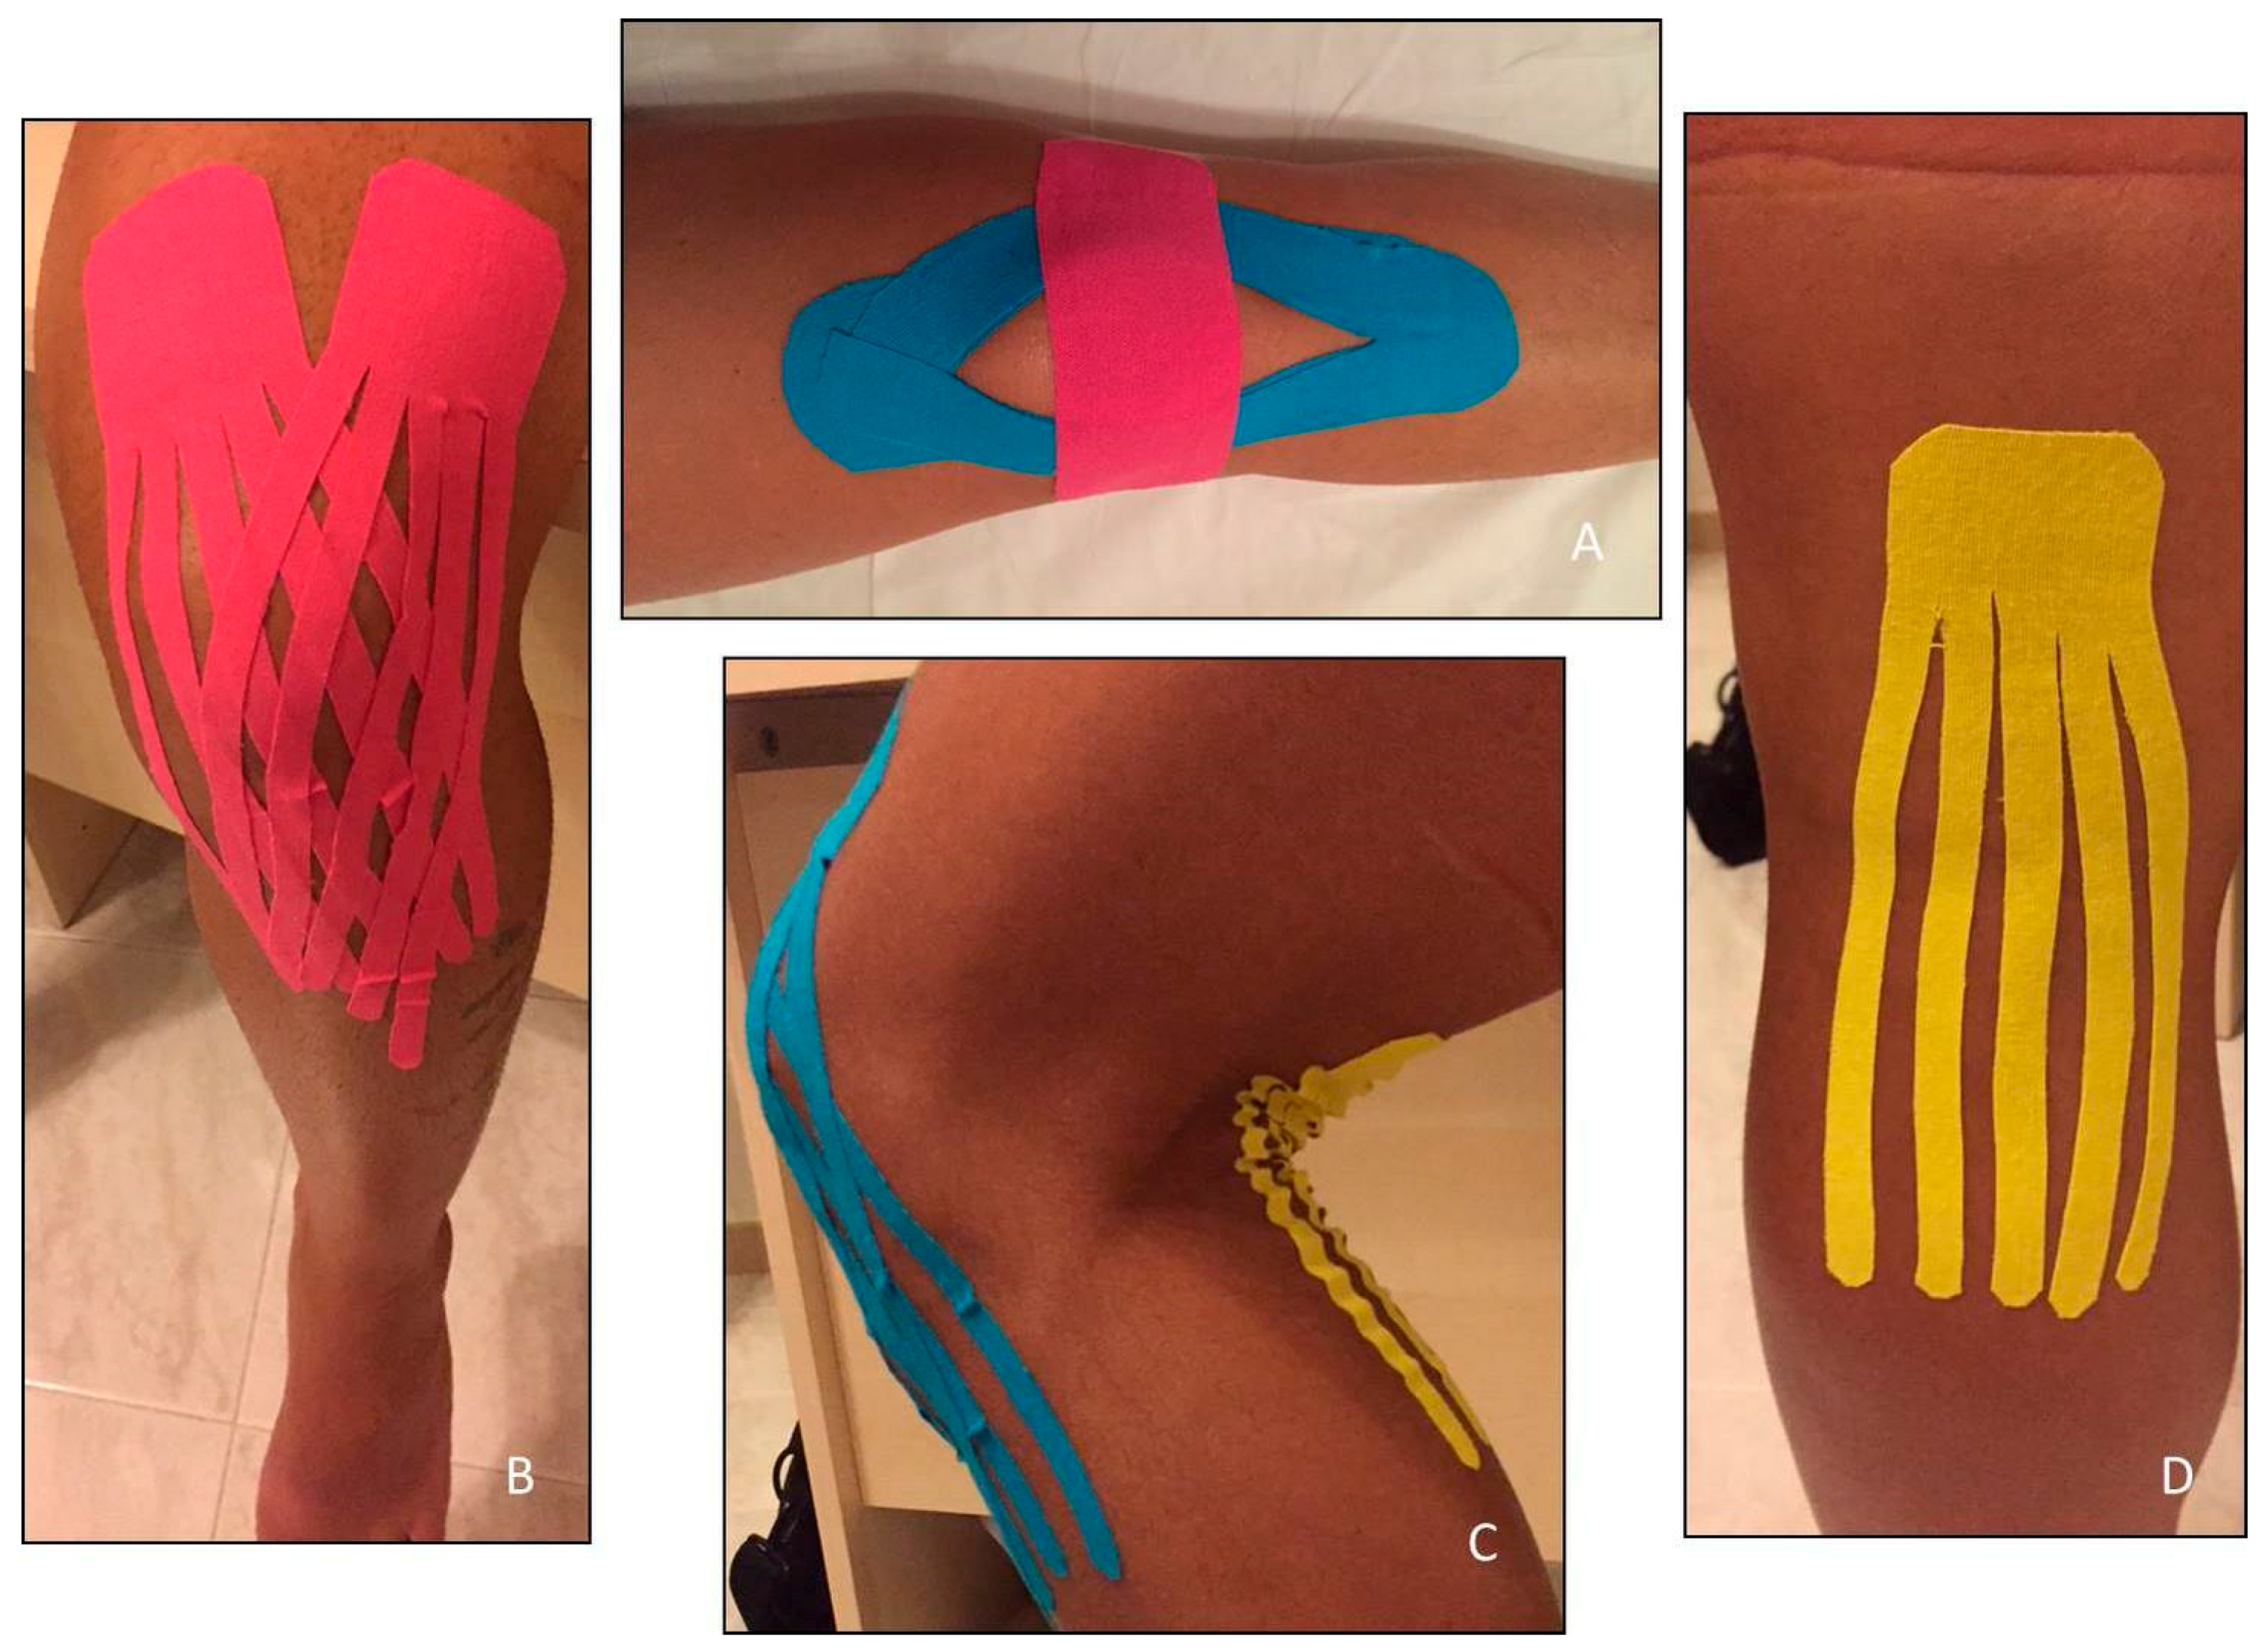 Kinesiology Tape for Arthritis: Does It Help Treat Pain and Stiffness?